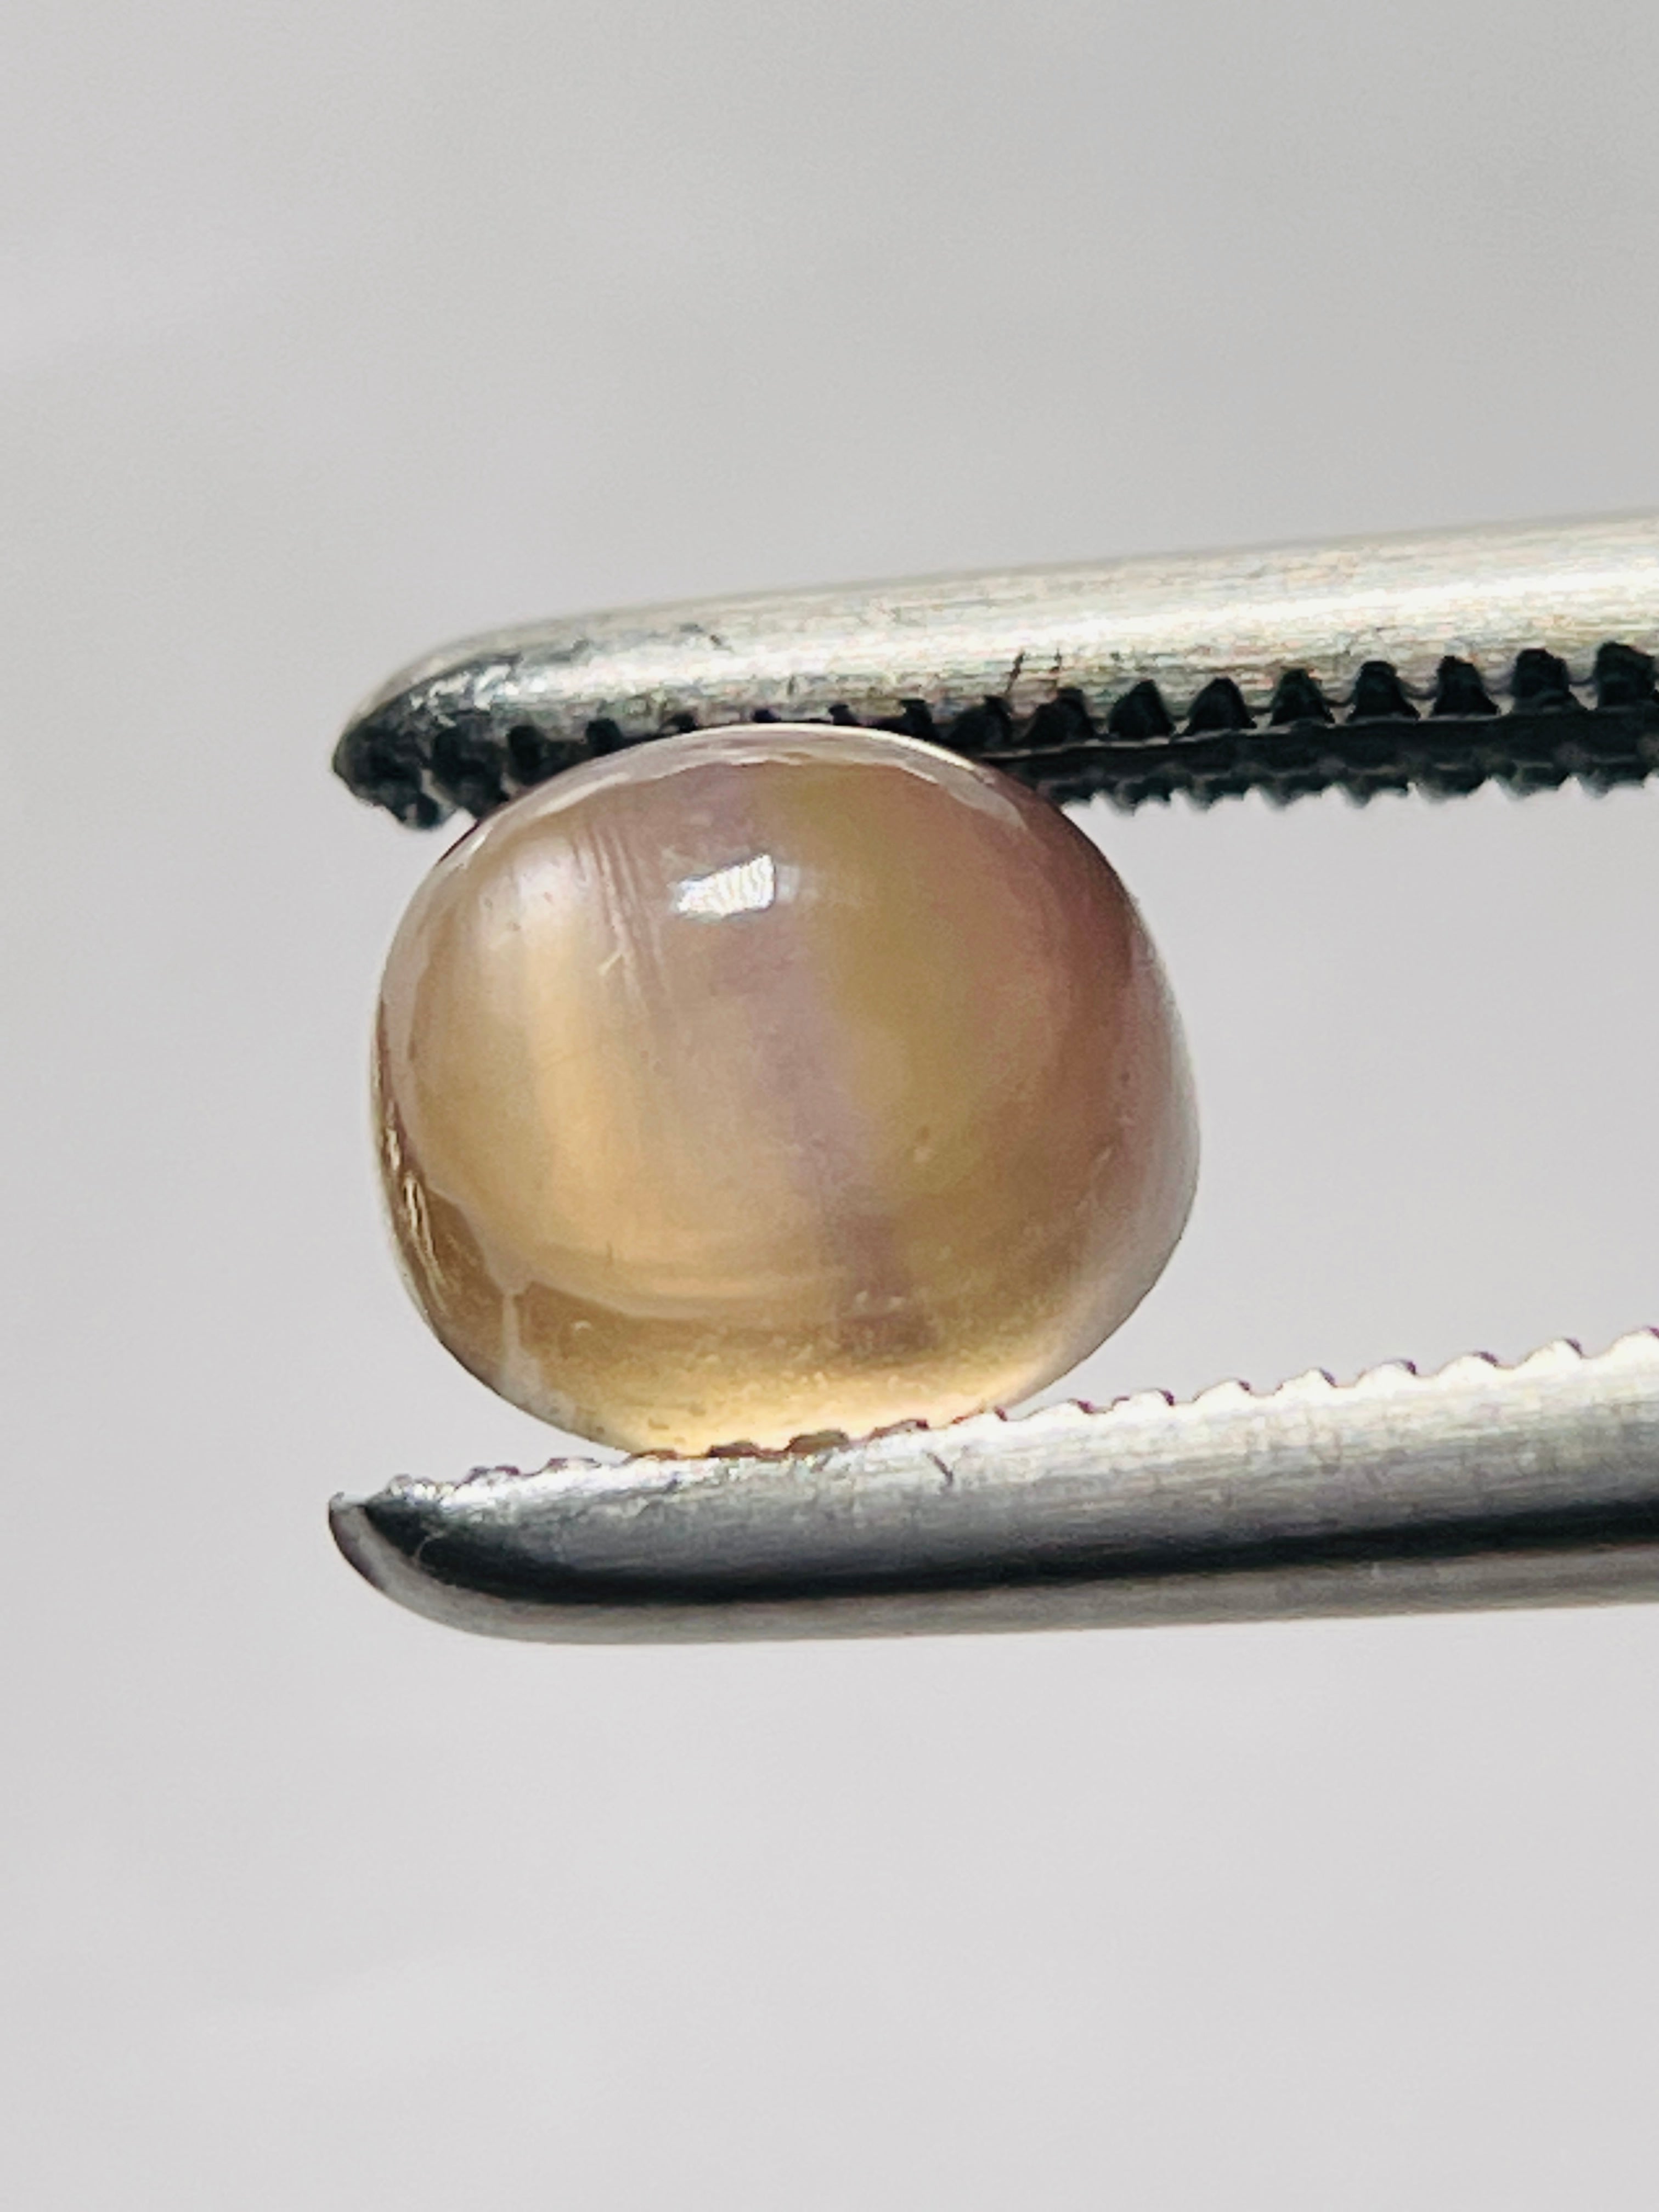 1.32Ct Umba Sapphire Cabochon. Tanzania Untreated Unheated. Incredible Banding On This One